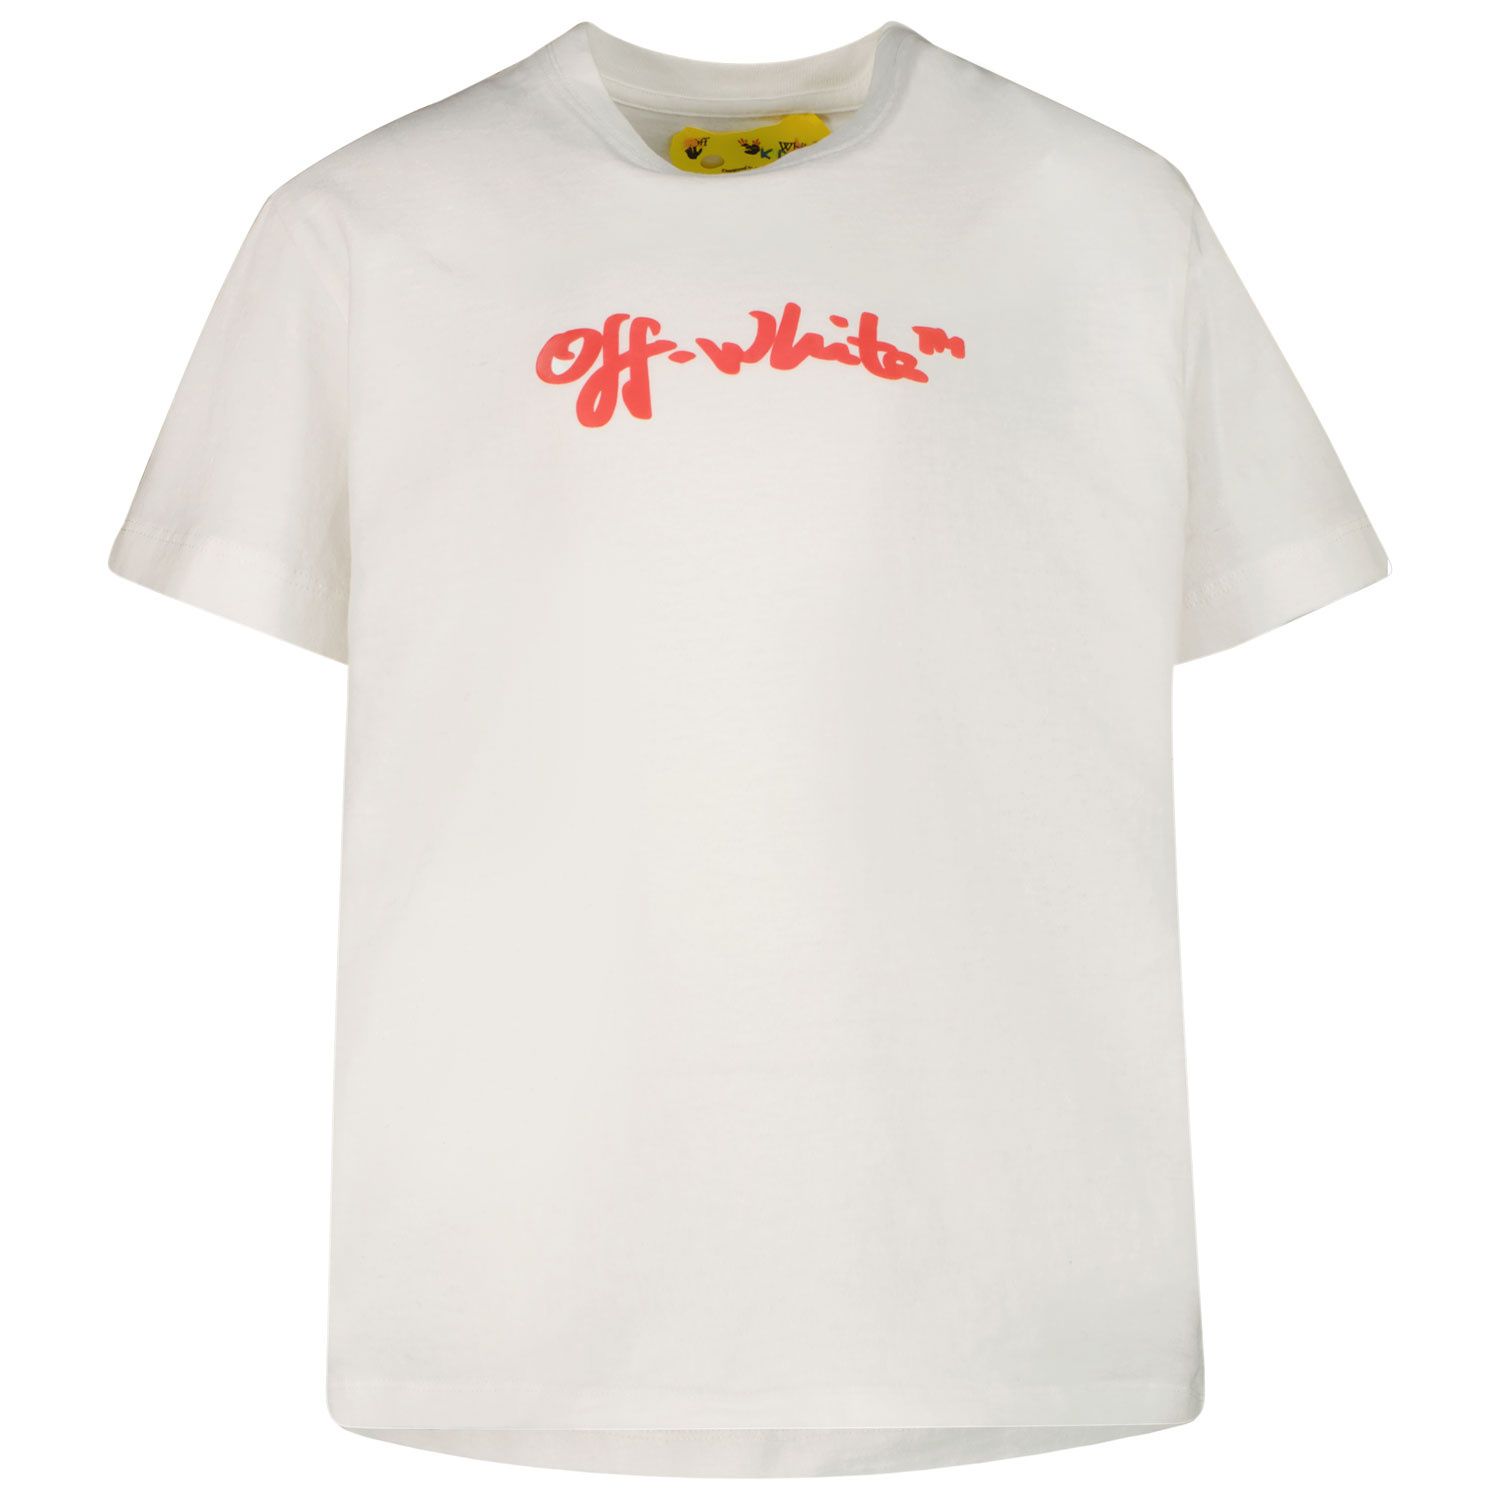 Picture of Off-White OBAA002S22JER003 kids t-shirt white